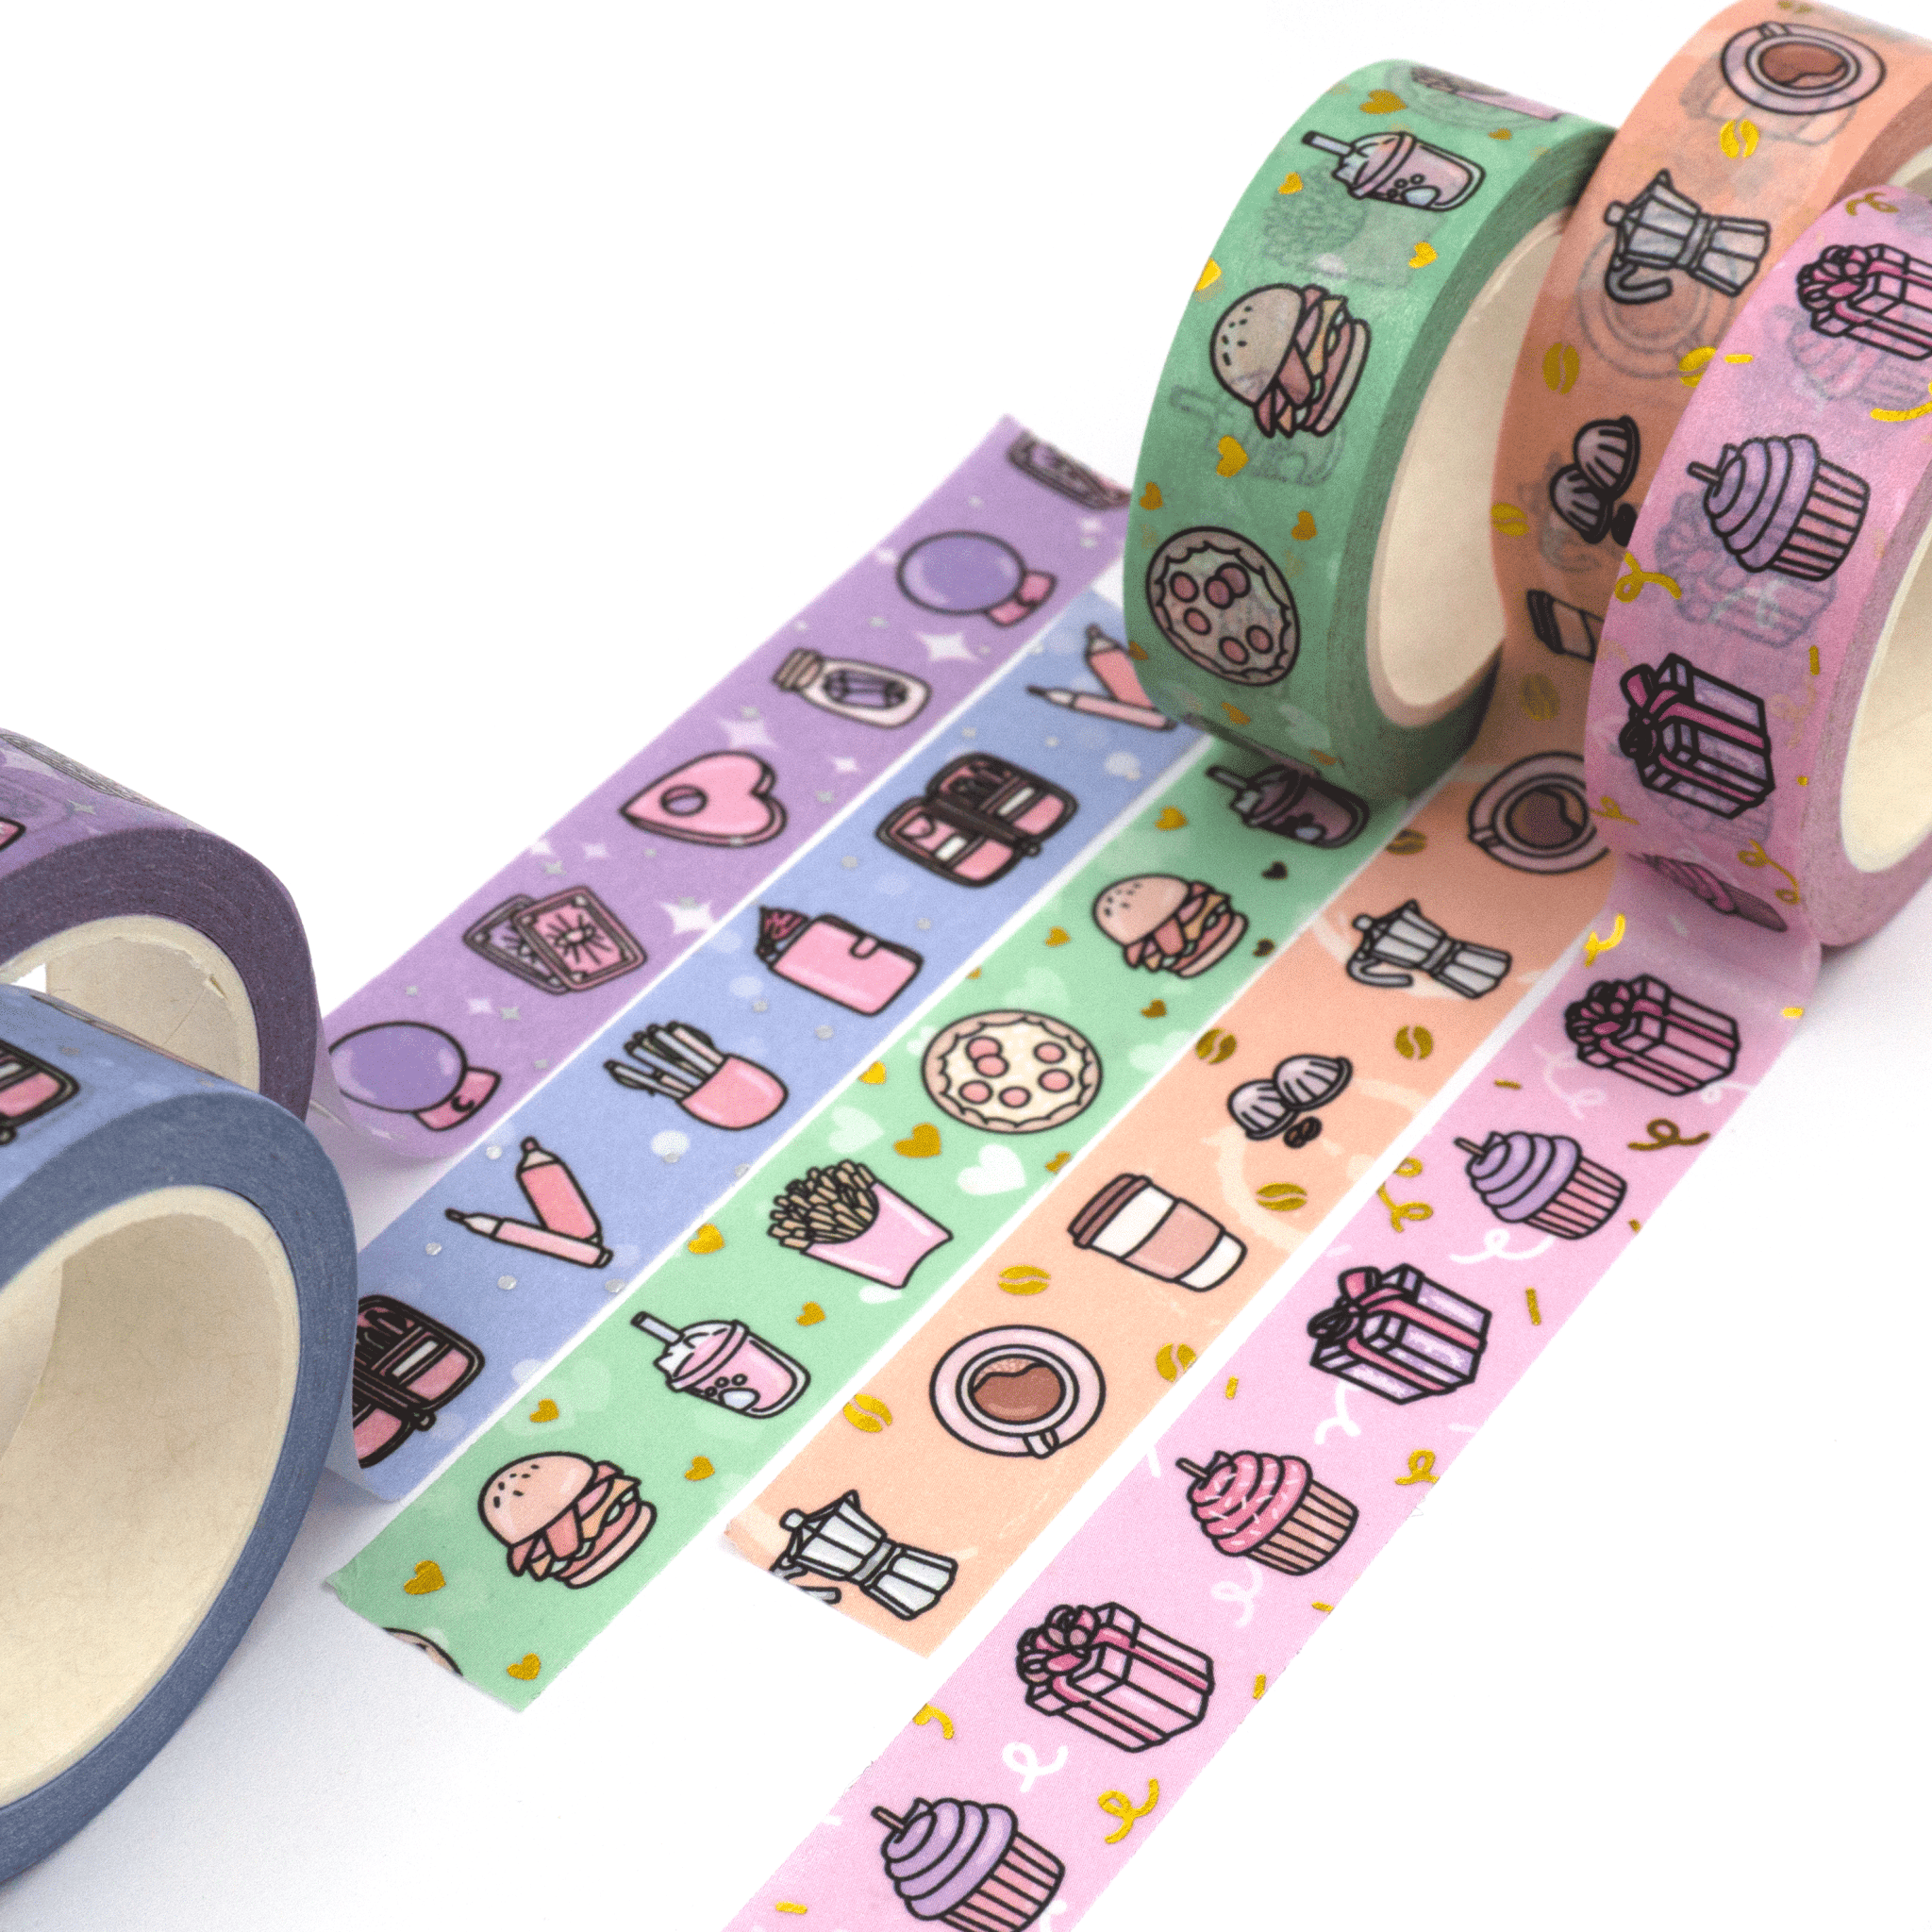 Foiled Doodle Washi Tape Bundle (5 Tapes) by Plannerface